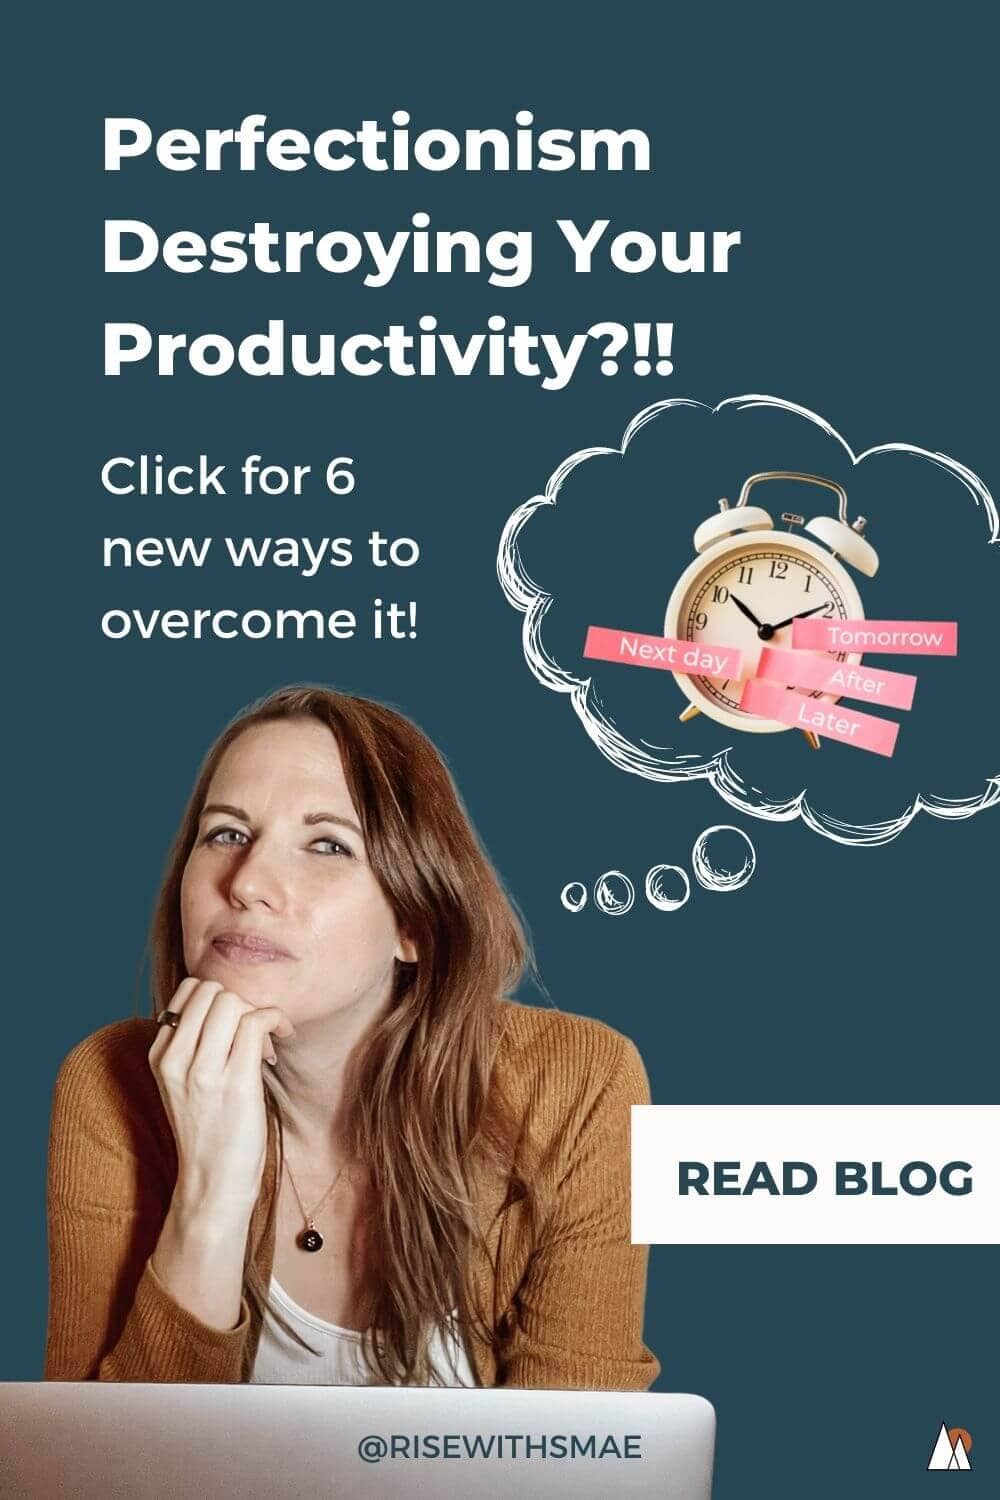 Perfectionism is Destroying Your Productivity – 6 Ways to Overcome It Now